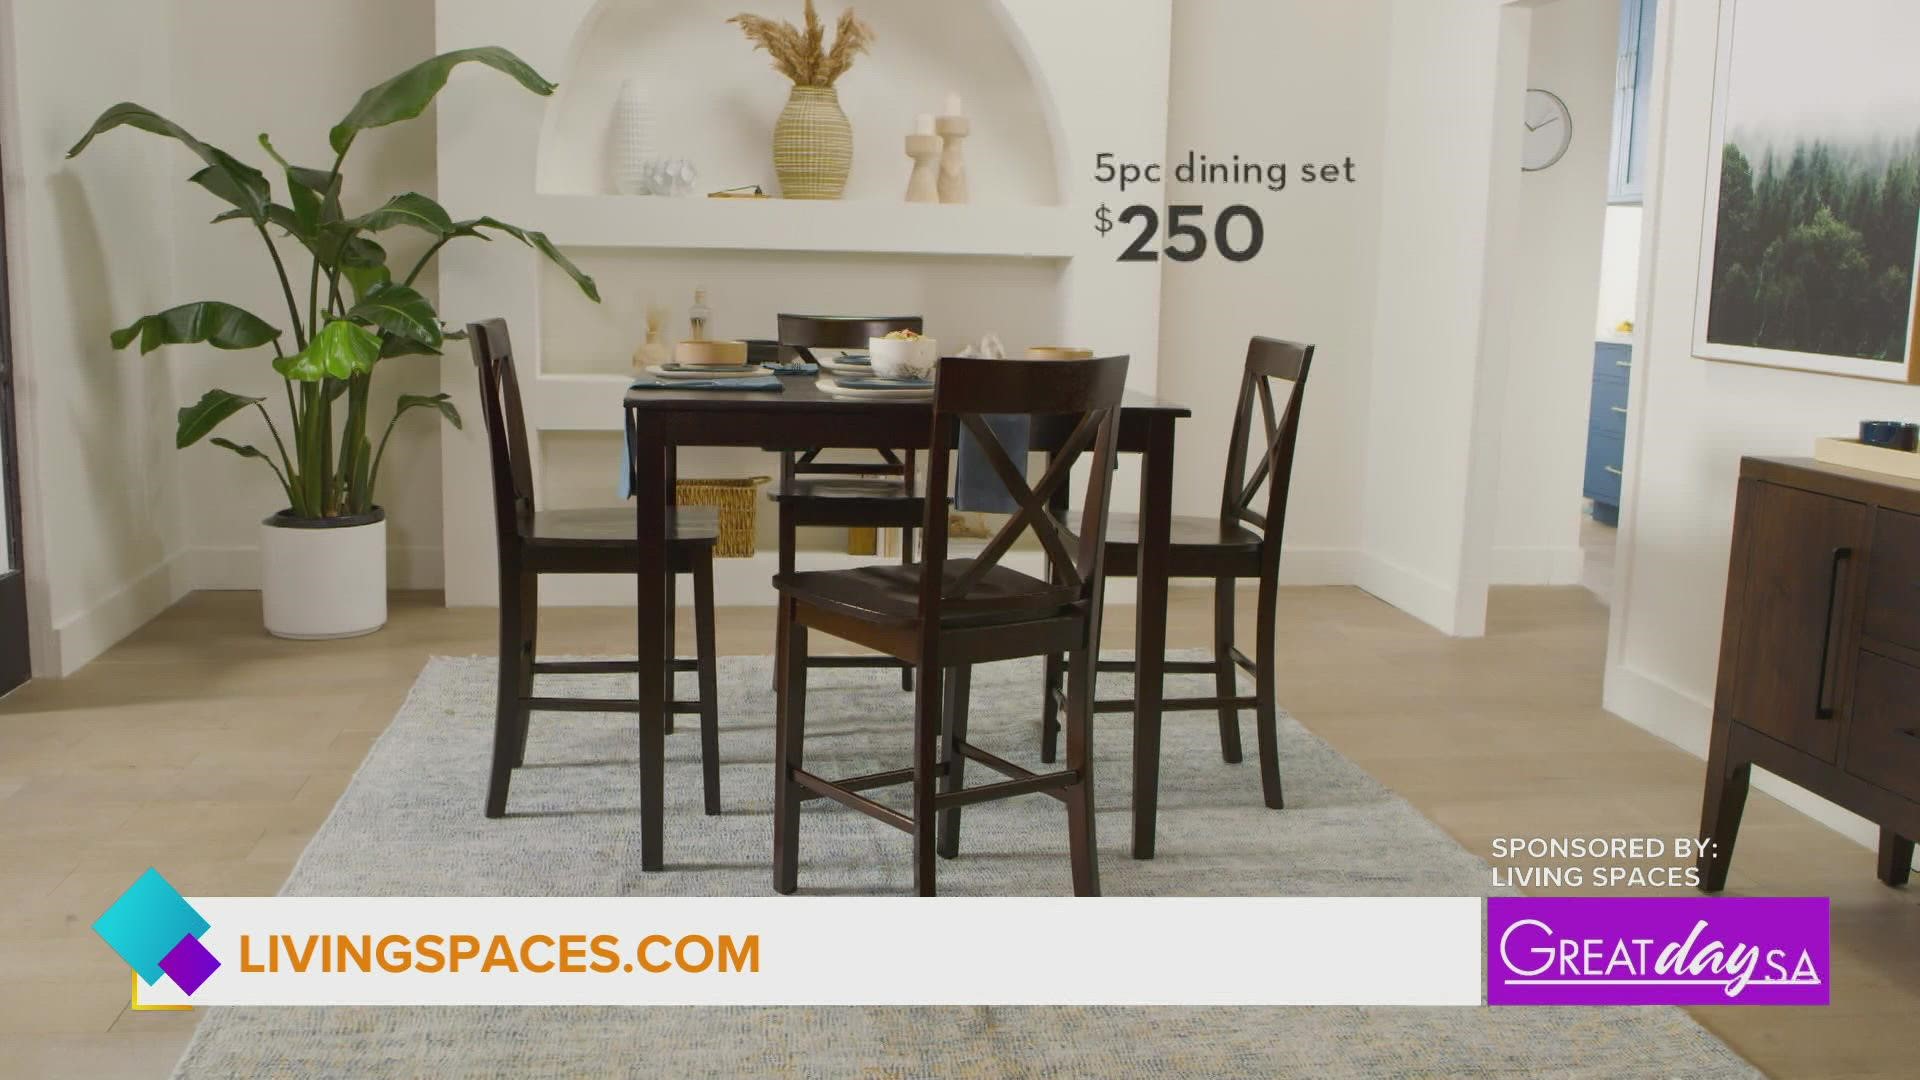 Sponsored by: Living Spaces